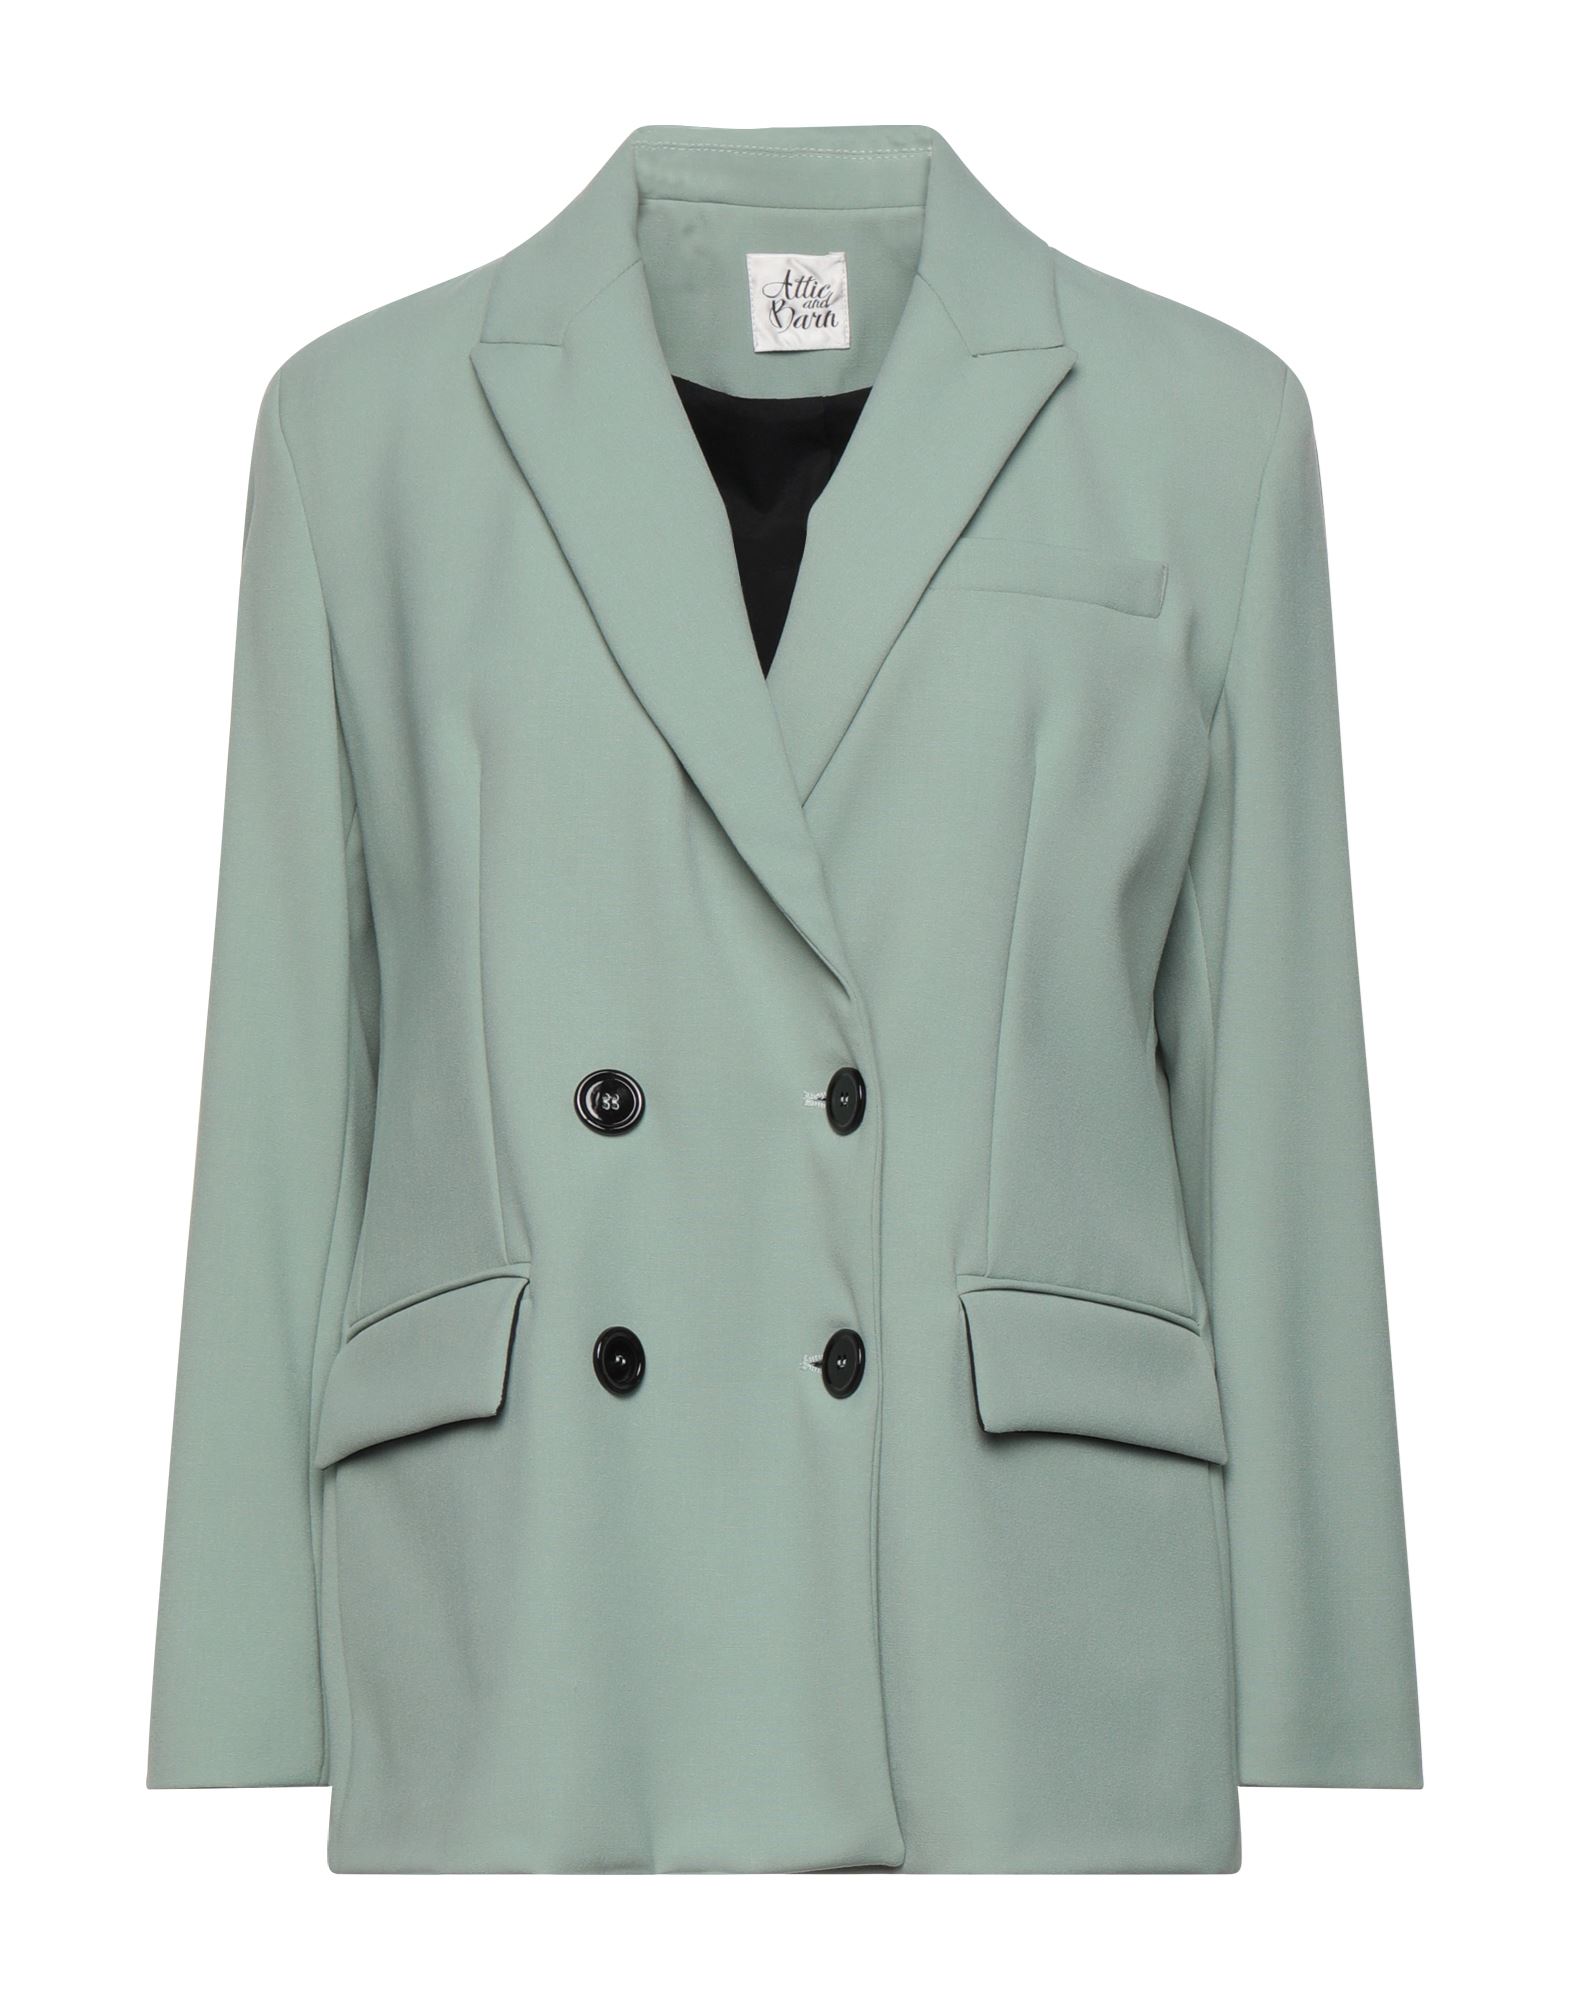 Attic And Barn Suit Jackets In Green